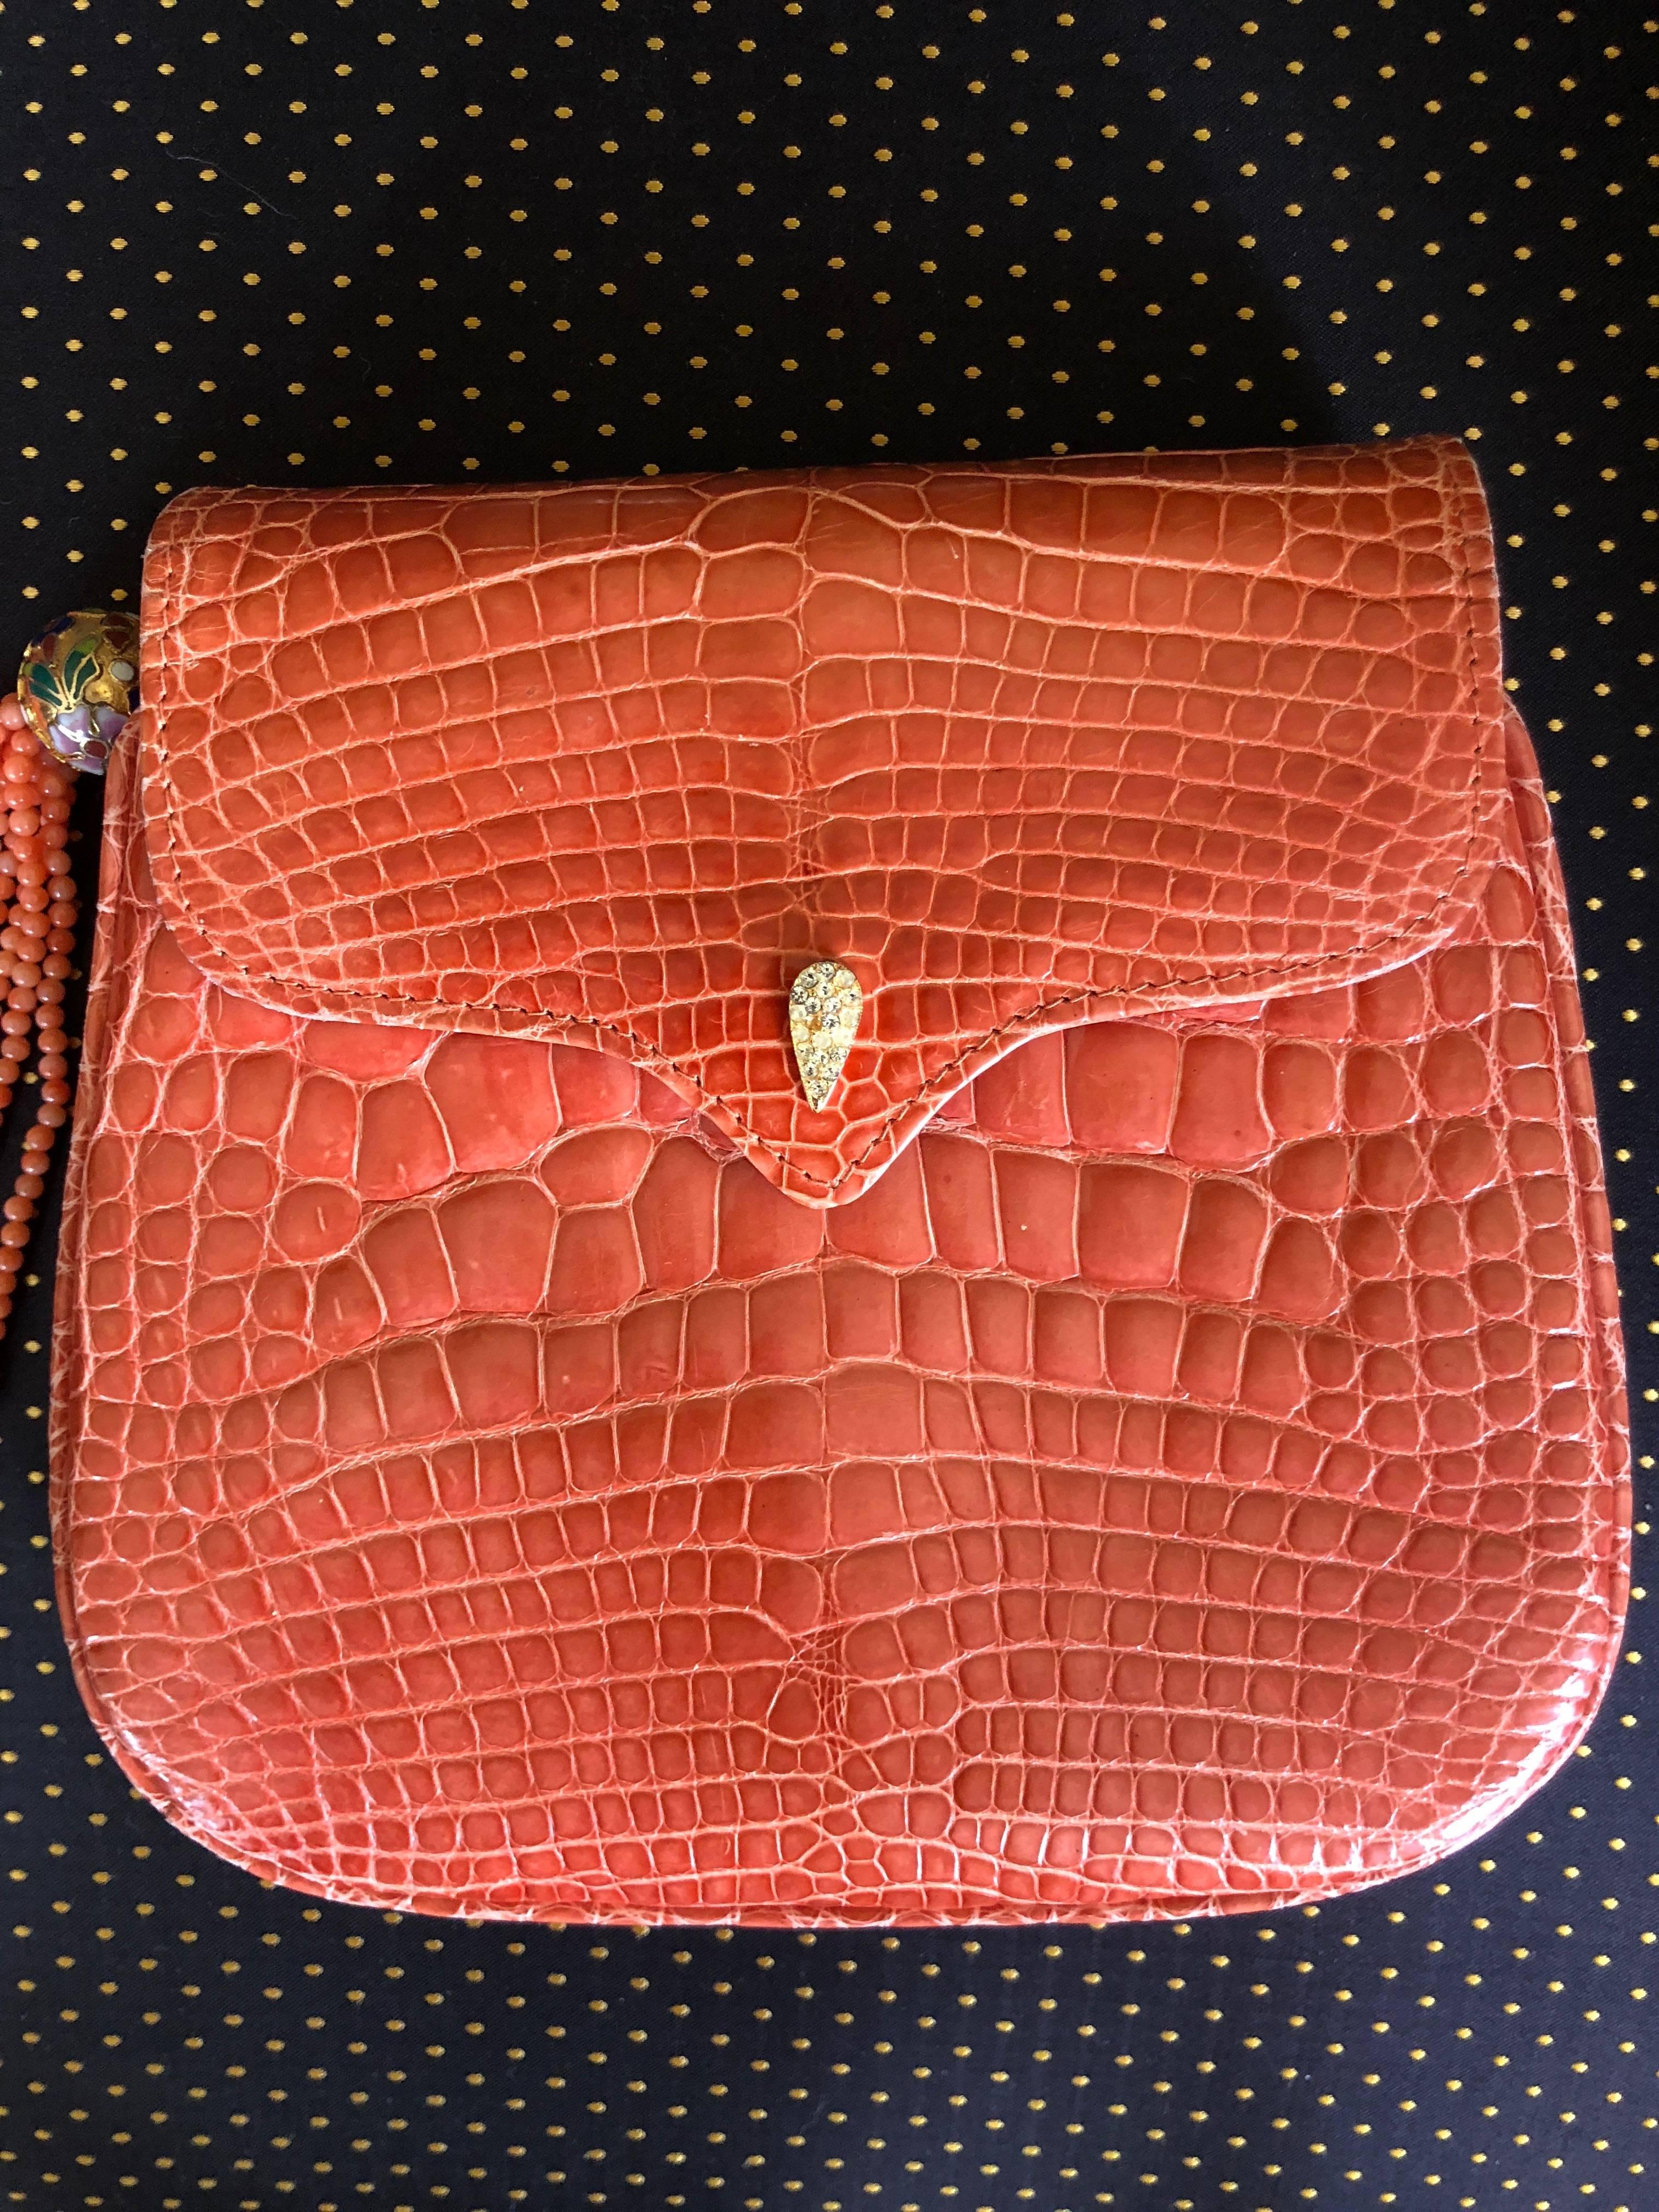 
Lana of London Exquisite Orange Crocodile Evening Bag with Coral Bead Strap and Tassel

 This is exquisite, but hard to photograph. 

7